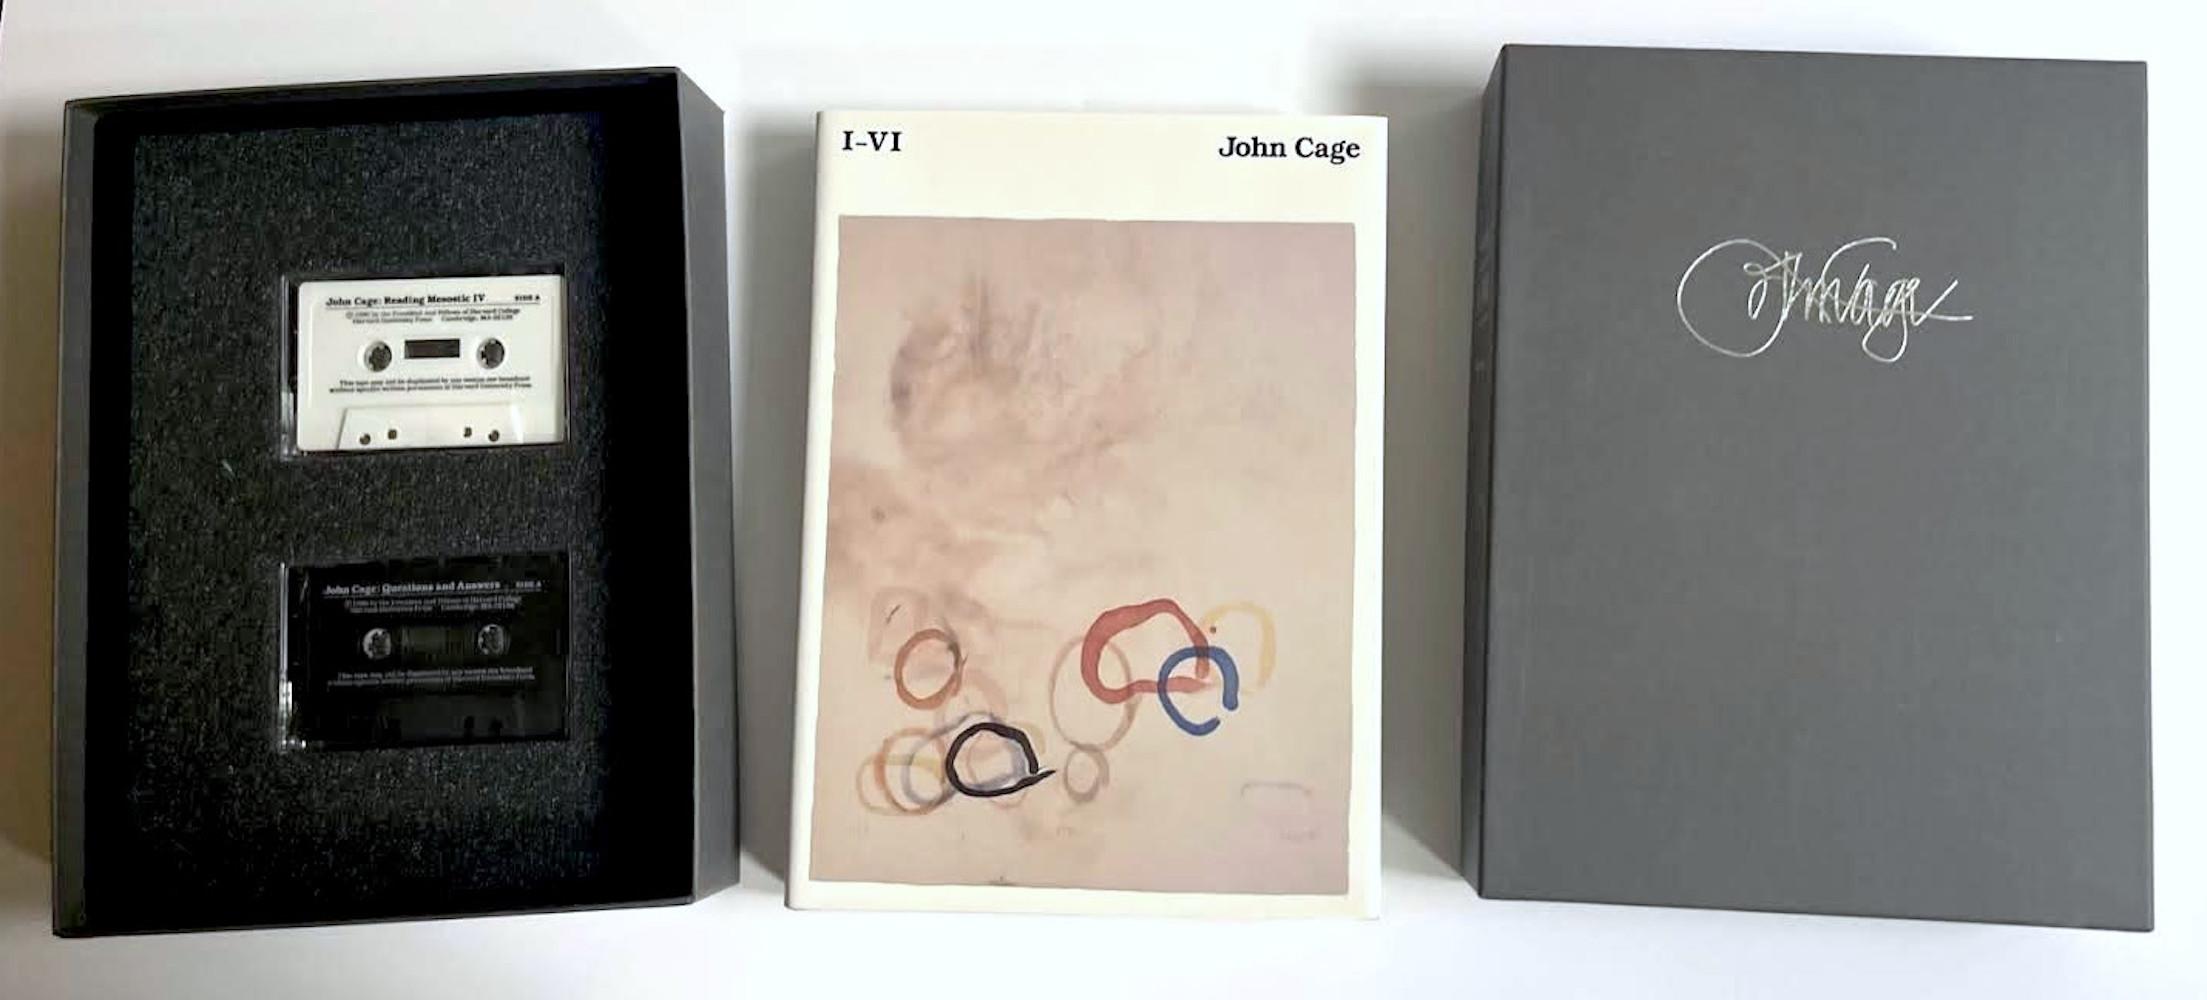 John Cage
I–VI (Hand signed box set), 1990
Boxed set: Mixed media hand signed hardback monograph accompanied with 2 audio cassettes and dust jacket and bound in a box
Hand signed by John Cage on the half title page
11 3/4 × 9 × 2 inches
This boxed